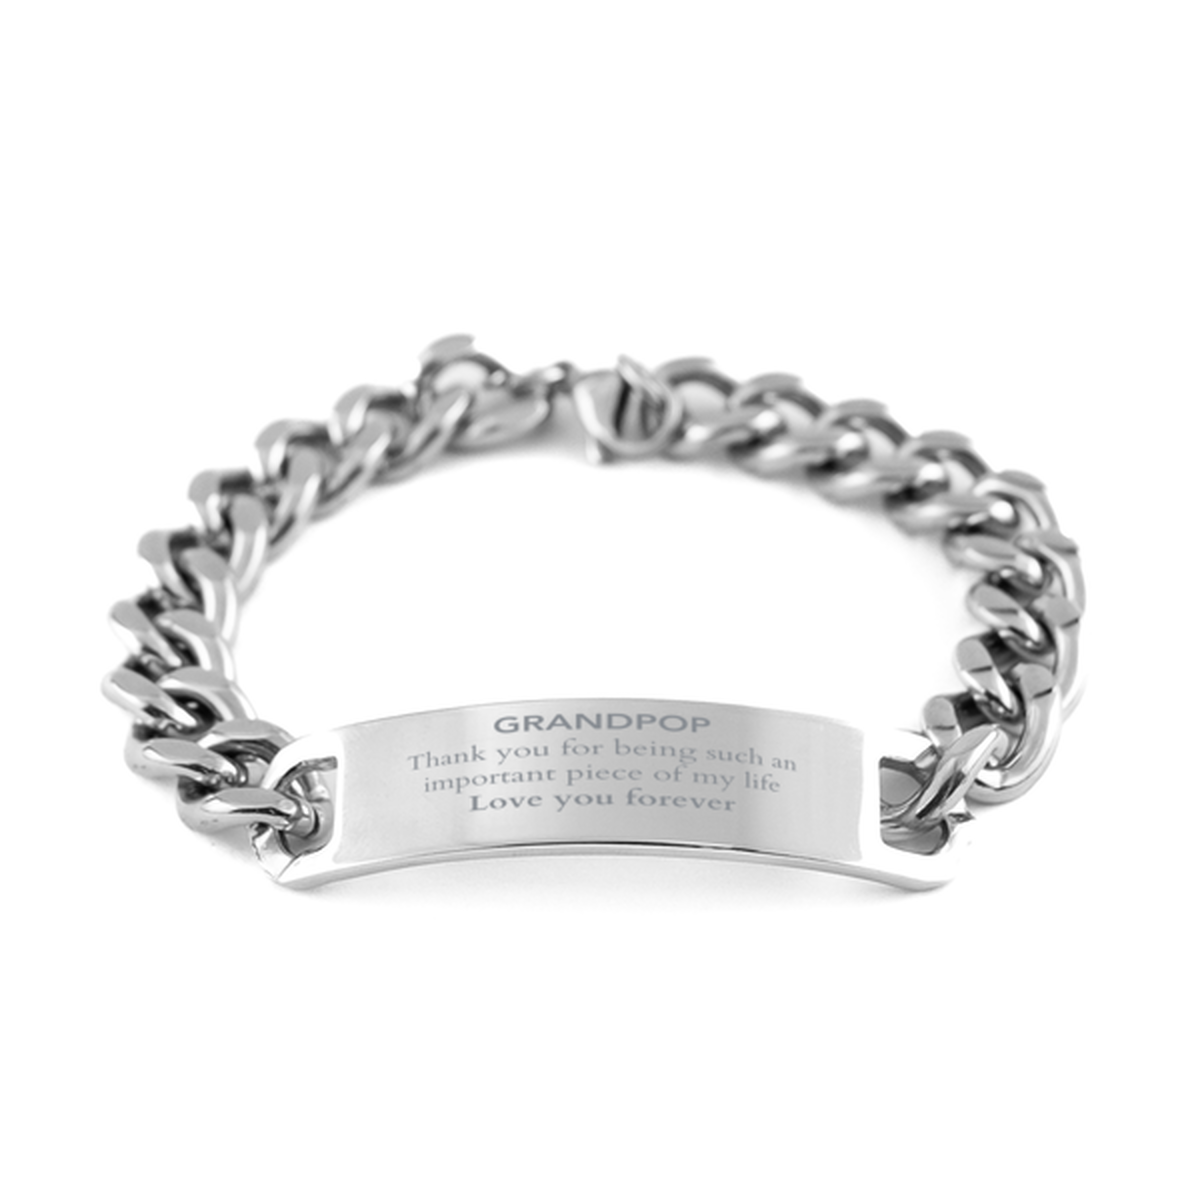 Appropriate Grandpop Cuban Chain Stainless Steel Bracelet Epic Birthday Gifts for Grandpop Thank you for being such an important piece of my life Grandpop Christmas Mothers Fathers Day